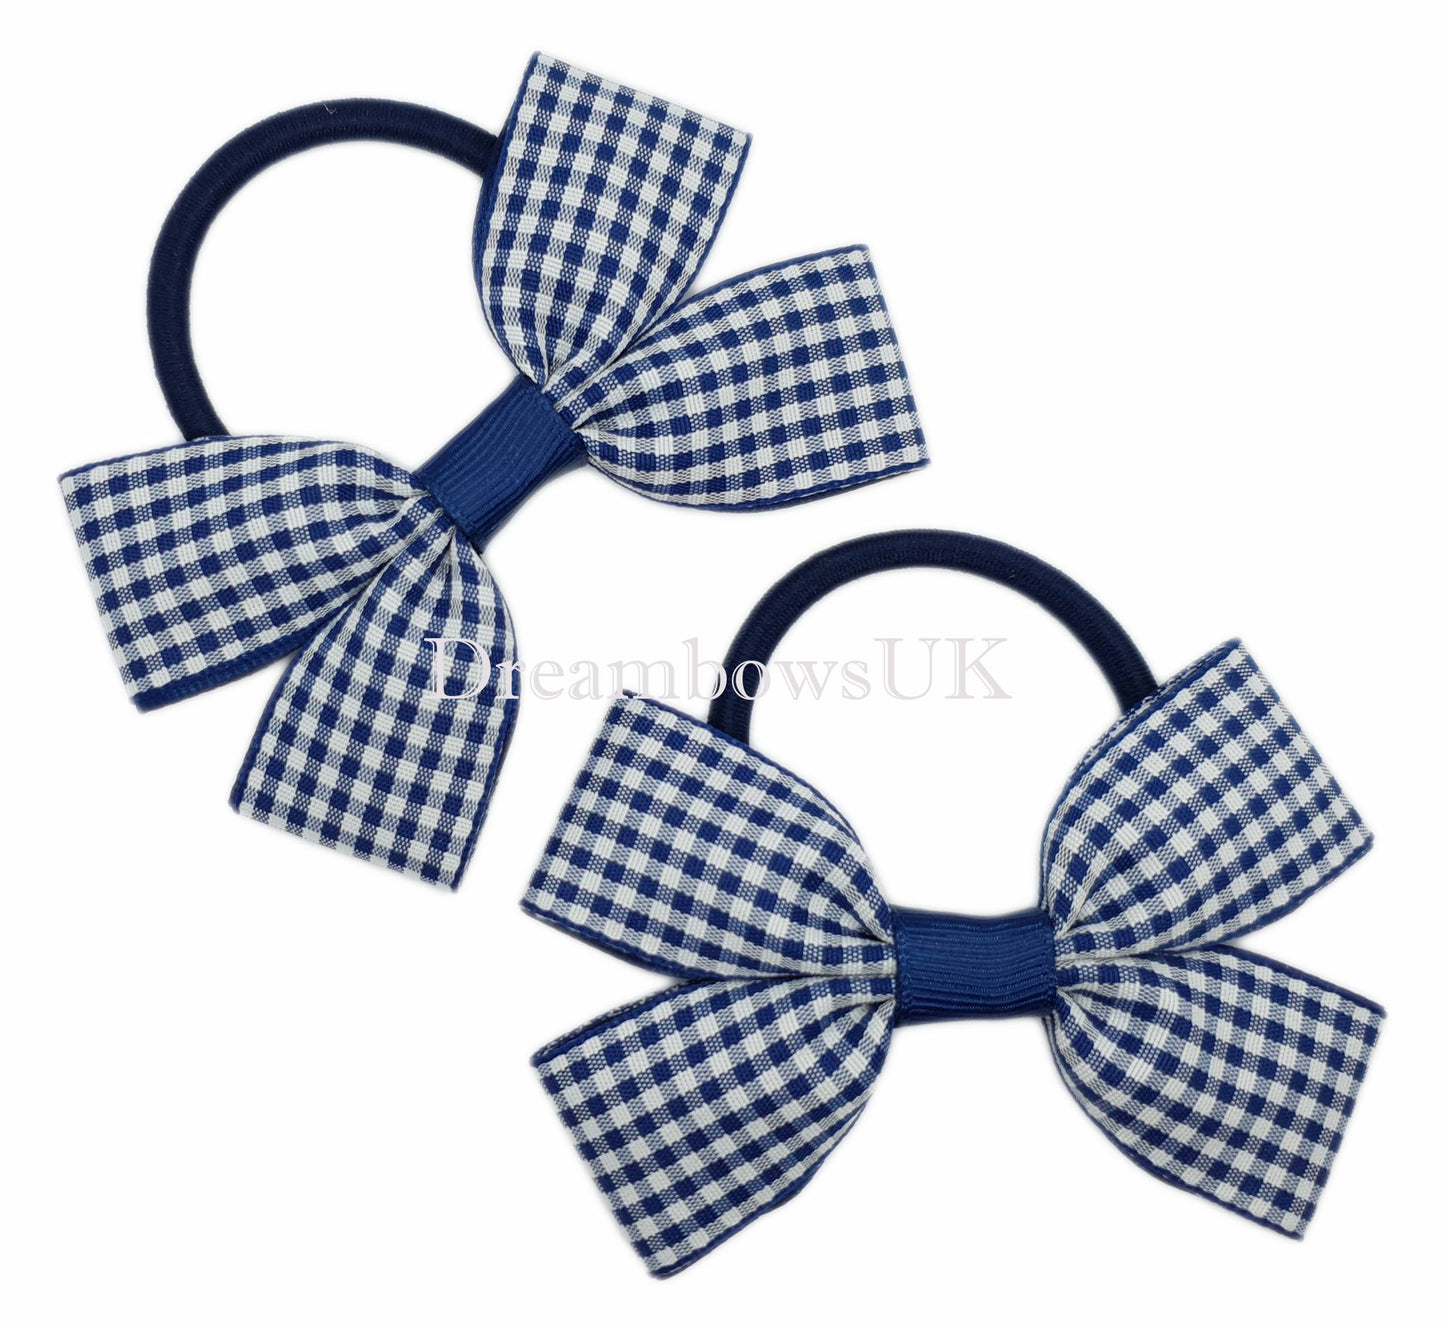 Navy blue gingham hair bows on thick hair ties